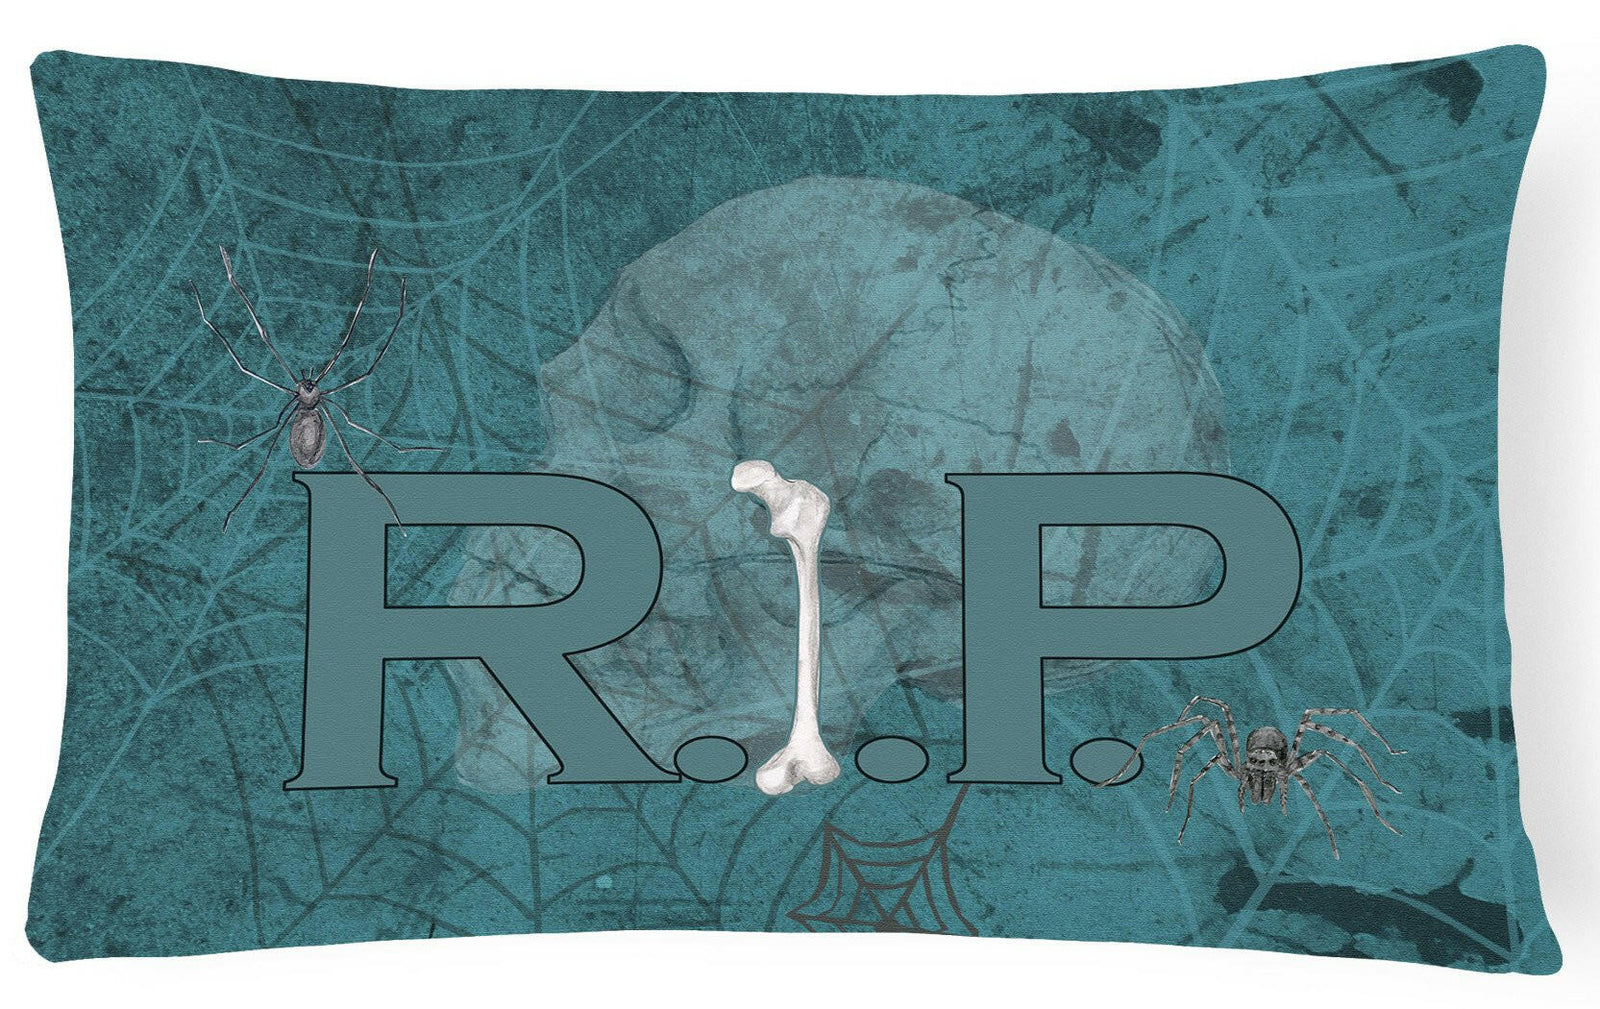 RIP Rest in Peace with spider web Halloween   Canvas Fabric Decorative Pillow by Caroline's Treasures